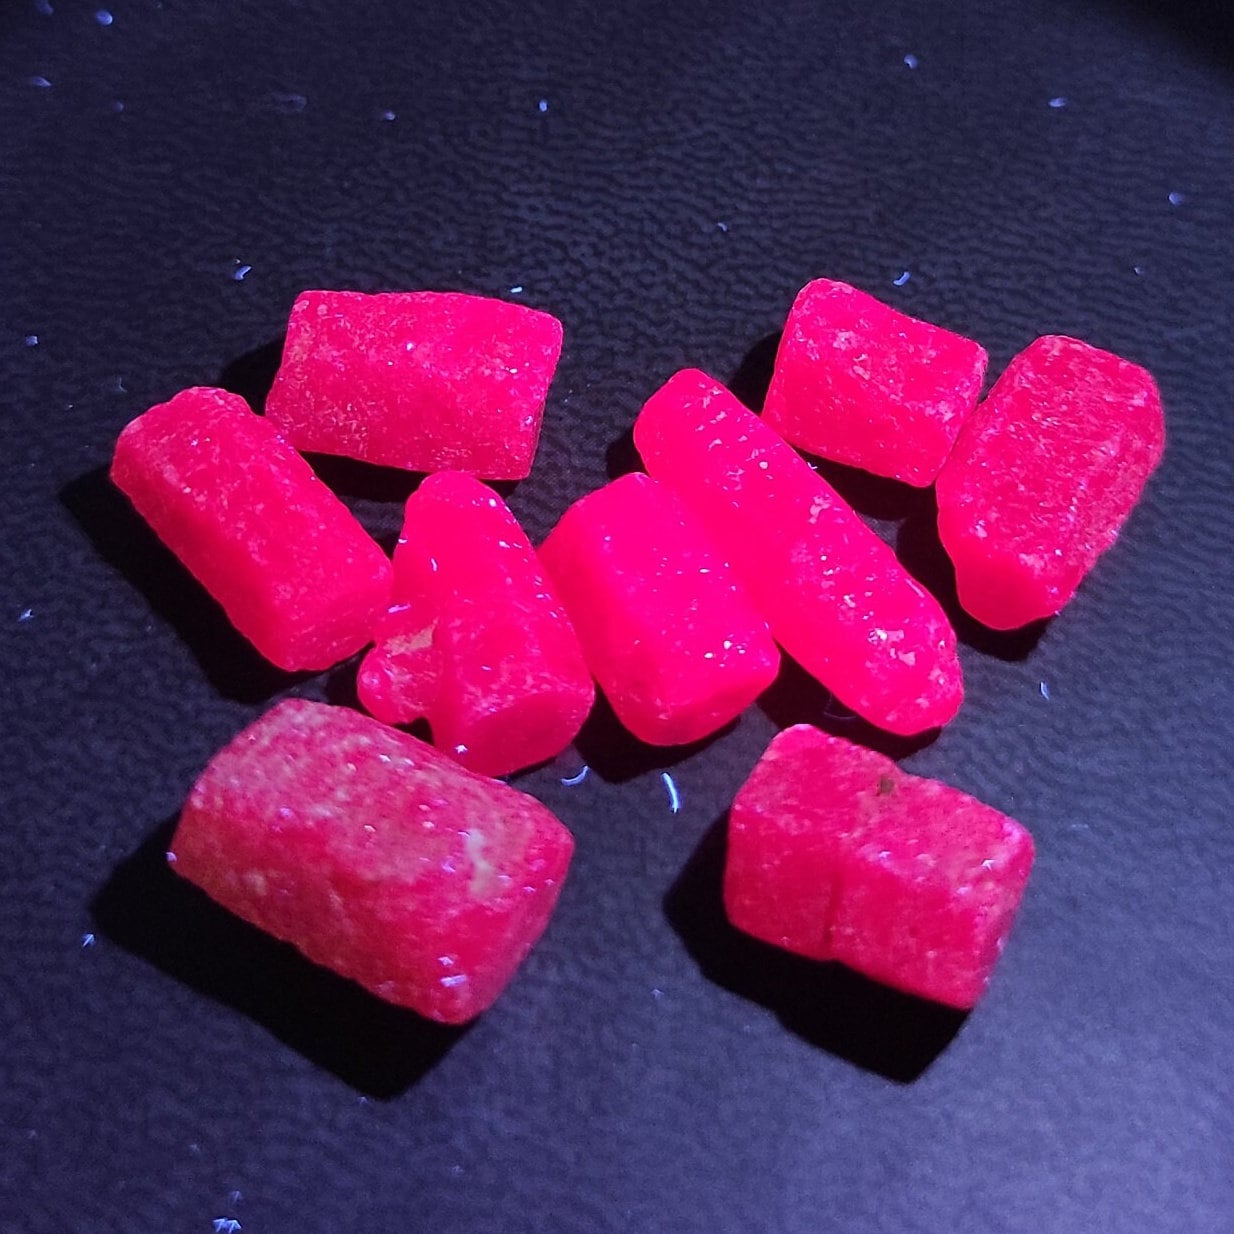 14.07g Lot of Ruby Crystals - Madagascar Rubies - UV Reactive - Loose Gemstones - Terminated Ruby Crystals - Loose Rough Gems - Unheated